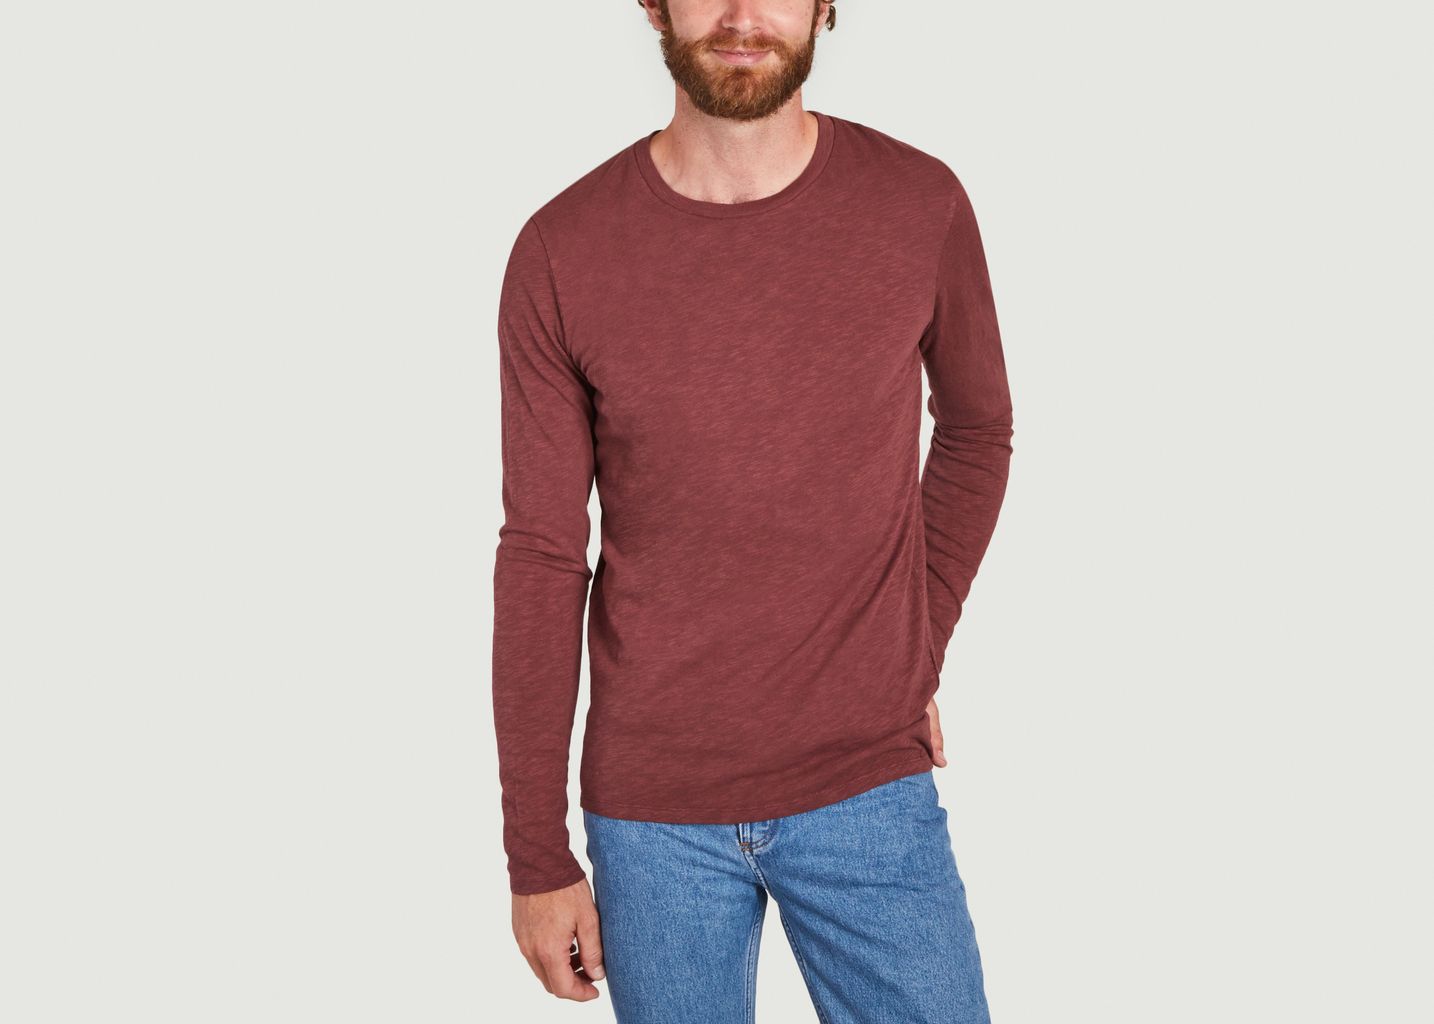 Bysapick Long Sleeve Flamed Cotton T-Shirt - American Vintage